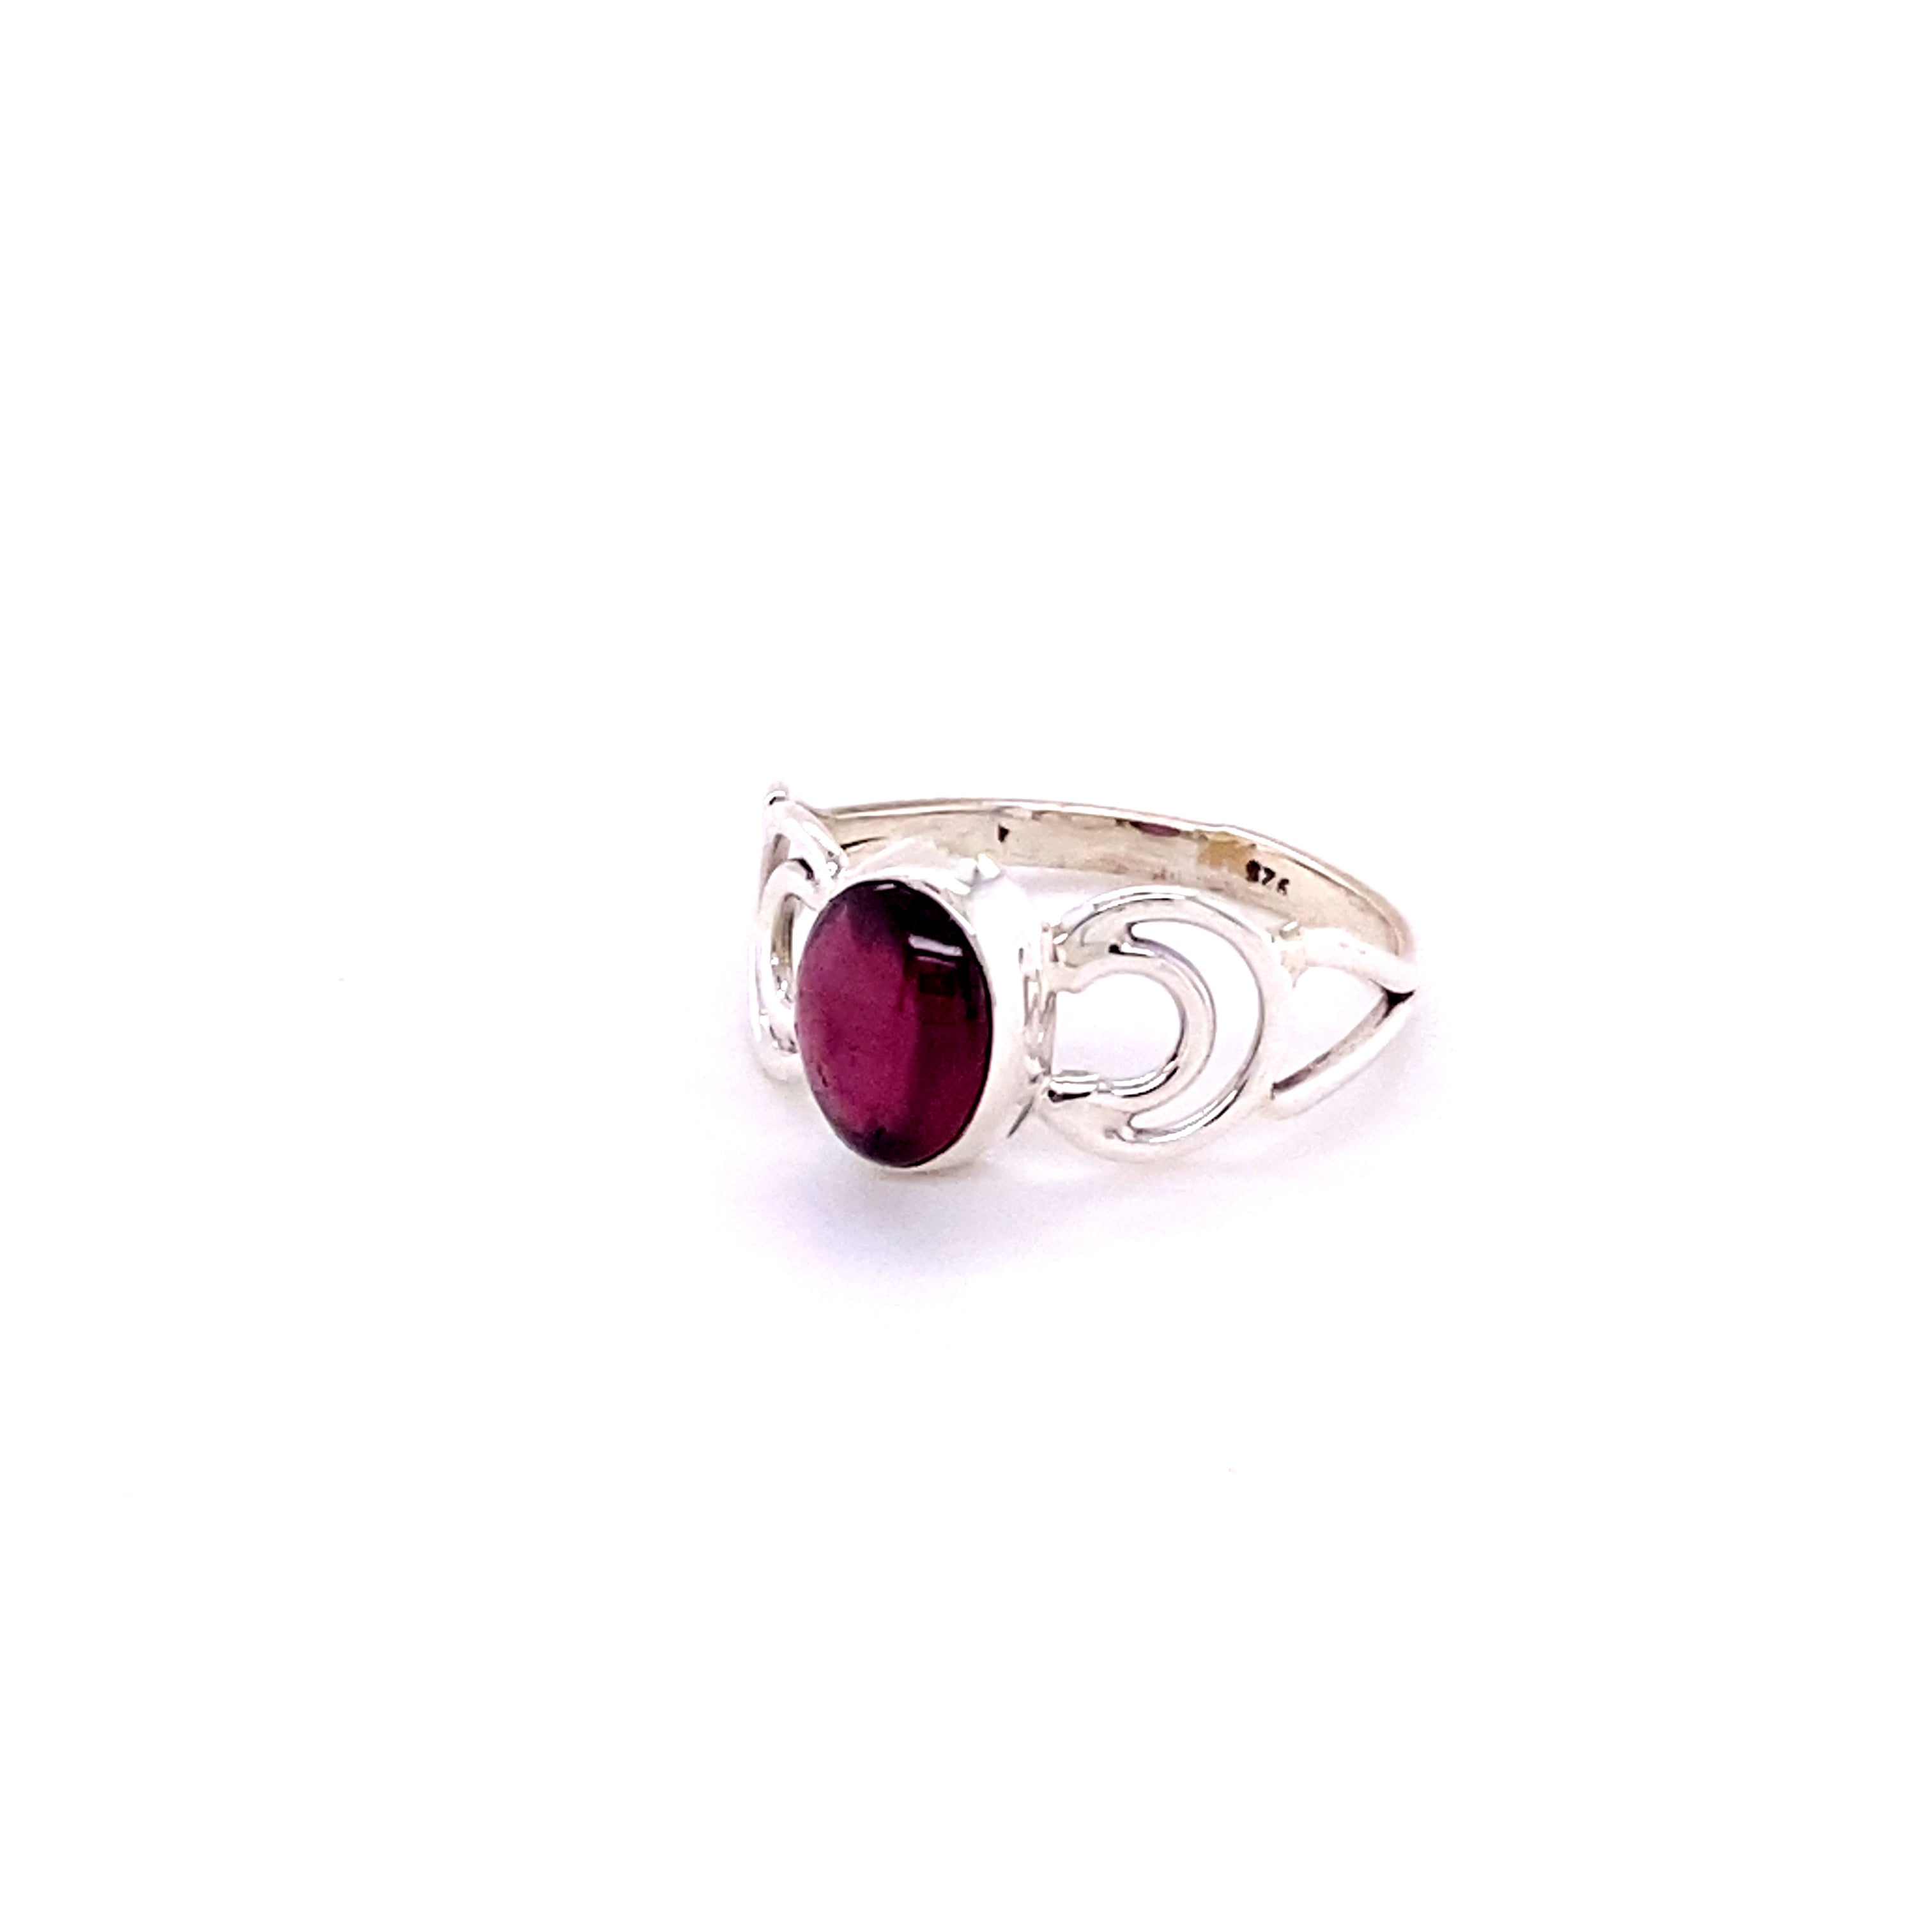 HAND CRAFTED DESIGN SIMULATED RUBY STONE 925 SILVER RING BAND GIFTING sr150  | TRIBAL ORNAMENTS